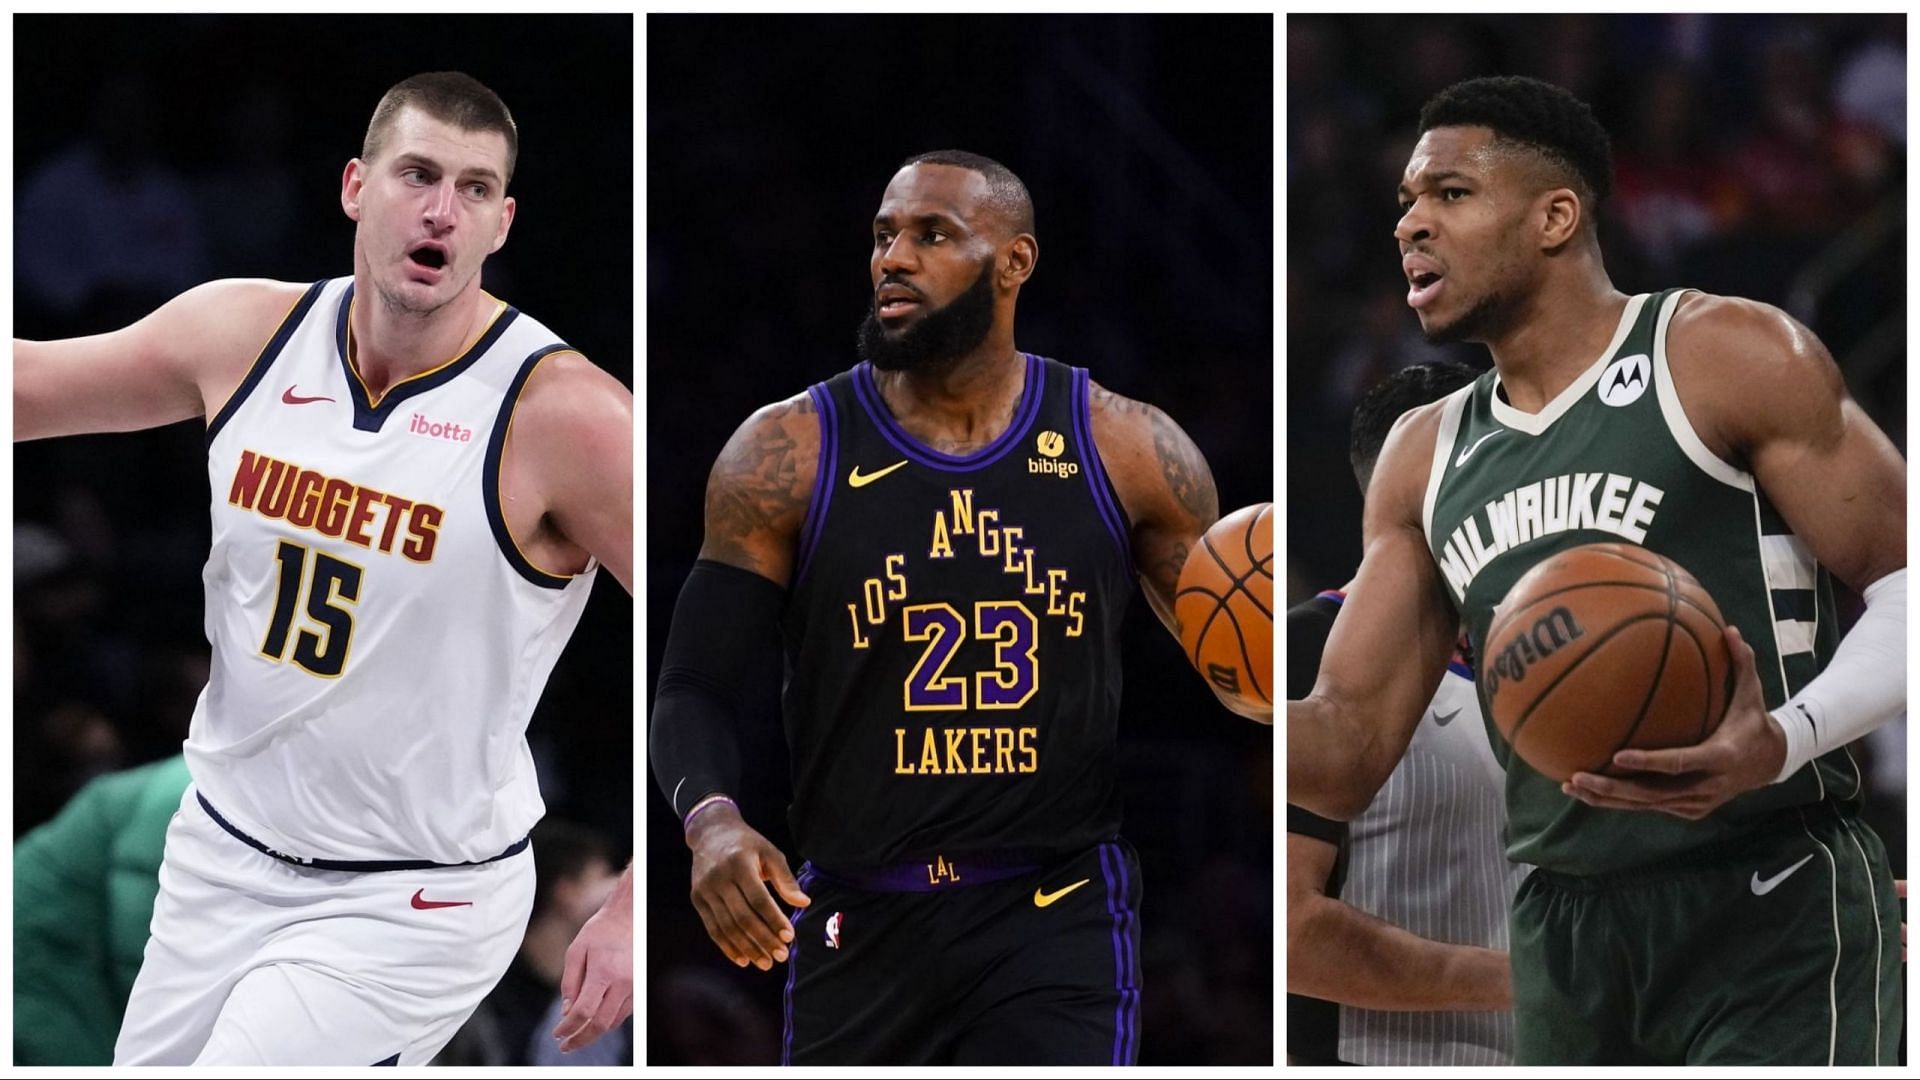 Nikola Jokic excludes Giannis Antetokounmpo from his top 5 NBA players list, garnering reactions from NBA fans